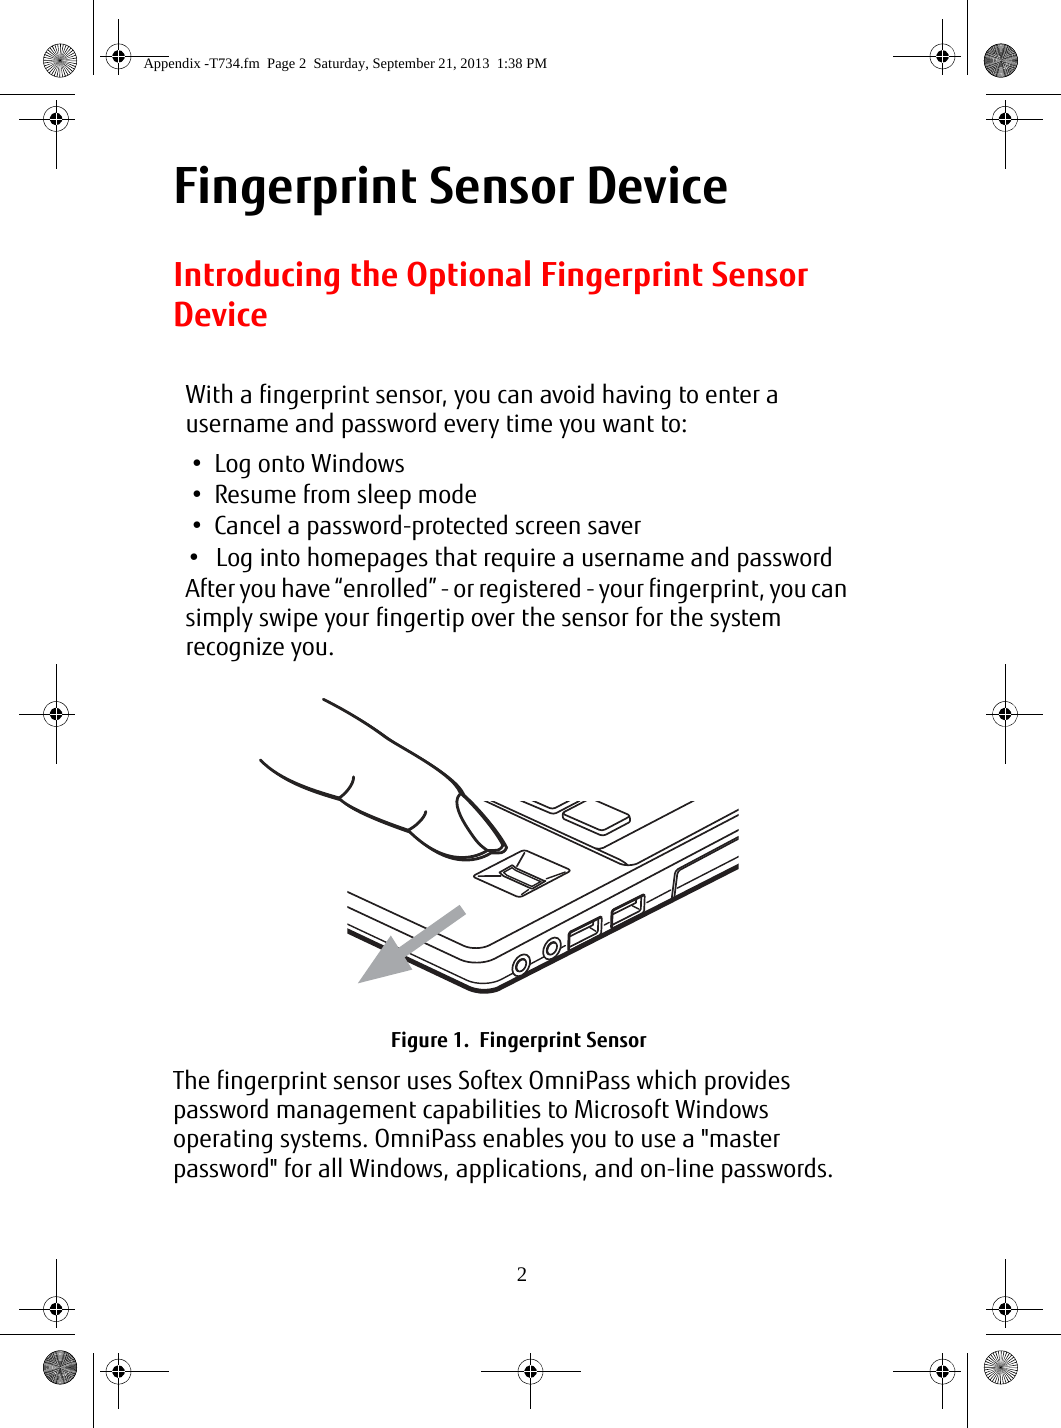 2Fingerprint Sensor DeviceIntroducing the Optional Fingerprint Sensor DeviceThe fingerprint sensor uses Softex OmniPass which provides password management capabilities to Microsoft Windows operating systems. OmniPass enables you to use a &quot;master password&quot; for all Windows, applications, and on-line passwords. With a fingerprint sensor, you can avoid having to enter a username and password every time you want to:• Log onto Windows• Resume from sleep mode• Cancel a password-protected screen saver• Log into homepages that require a username and passwordAfter you have “enrolled” - or registered - your fingerprint, you can simply swipe your fingertip over the sensor for the system recognize you.Figure 1.  Fingerprint SensorAppendix -T734.fm  Page 2  Saturday, September 21, 2013  1:38 PM